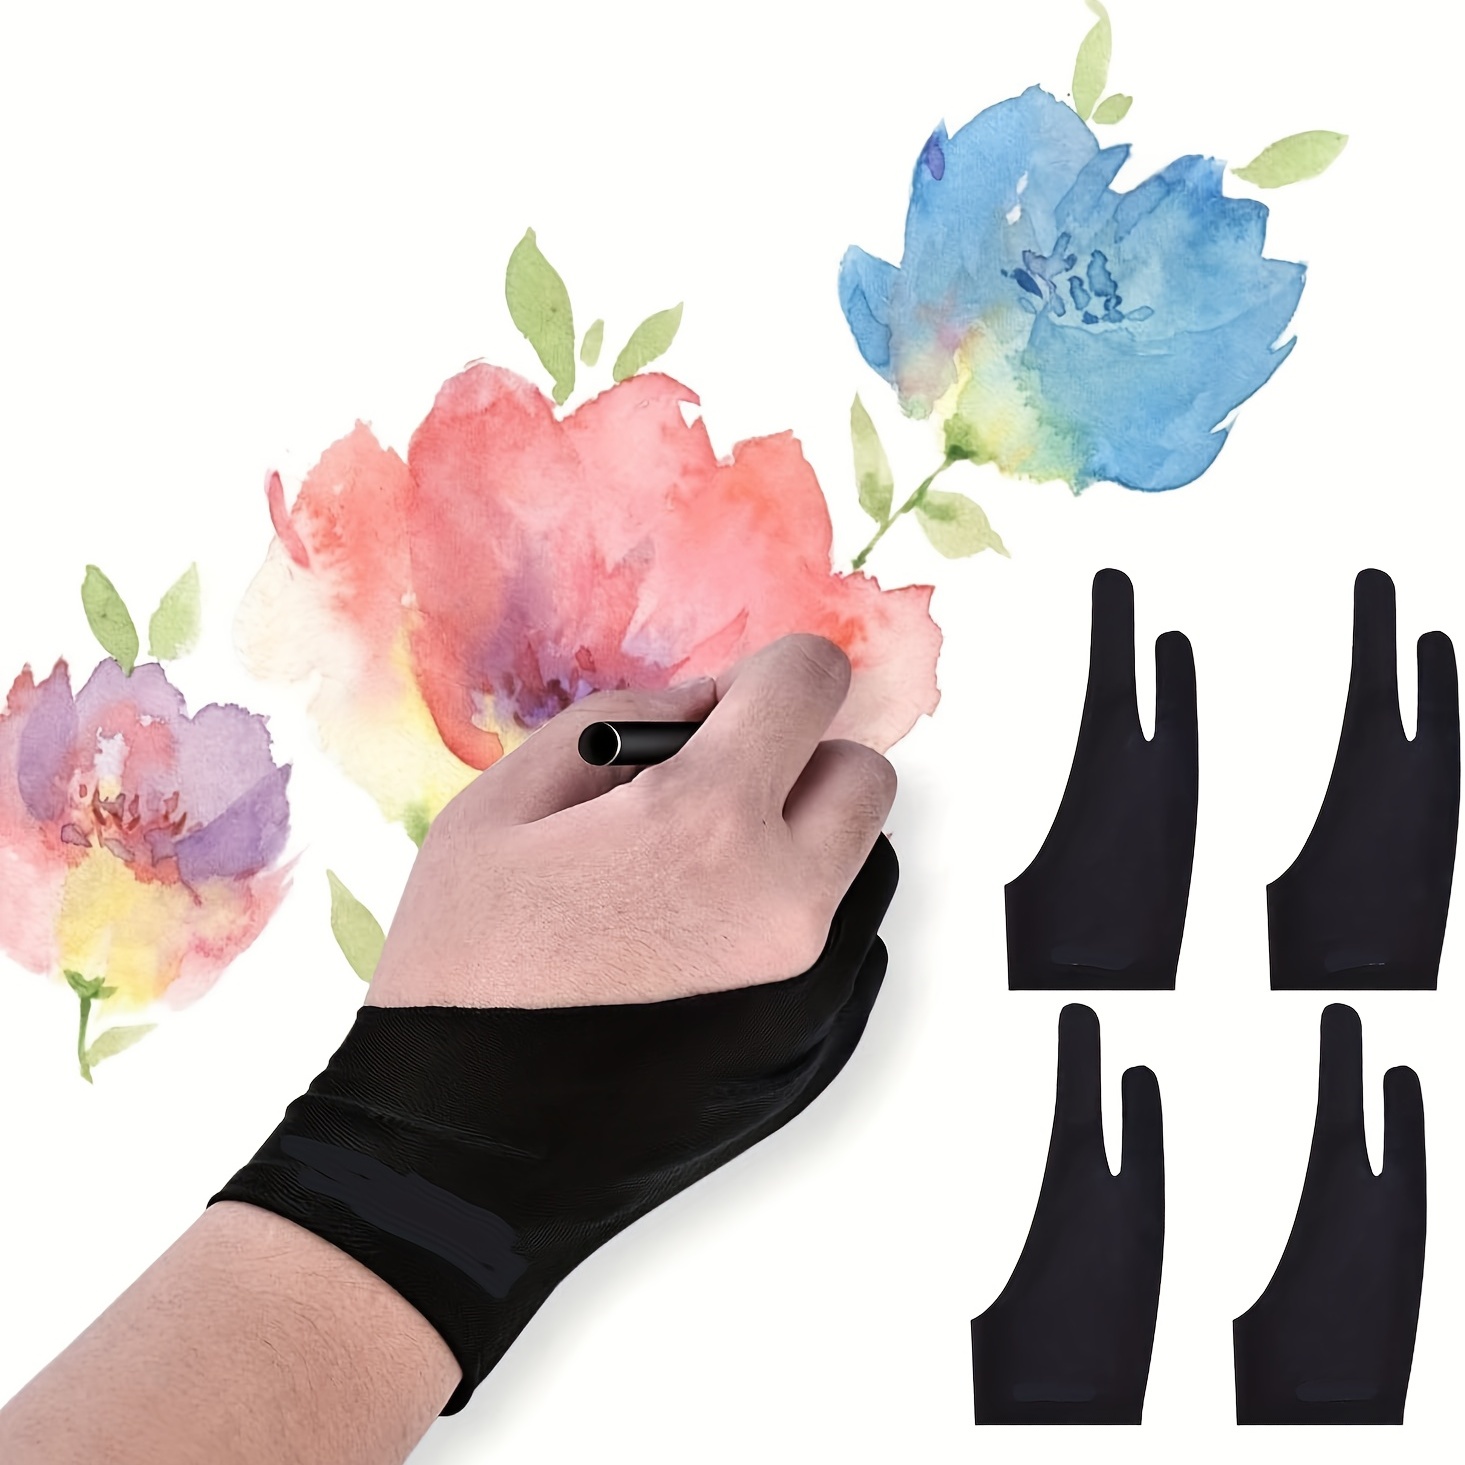 Need Glove Drawing Tablet, Touch Glove Graphic Tablet